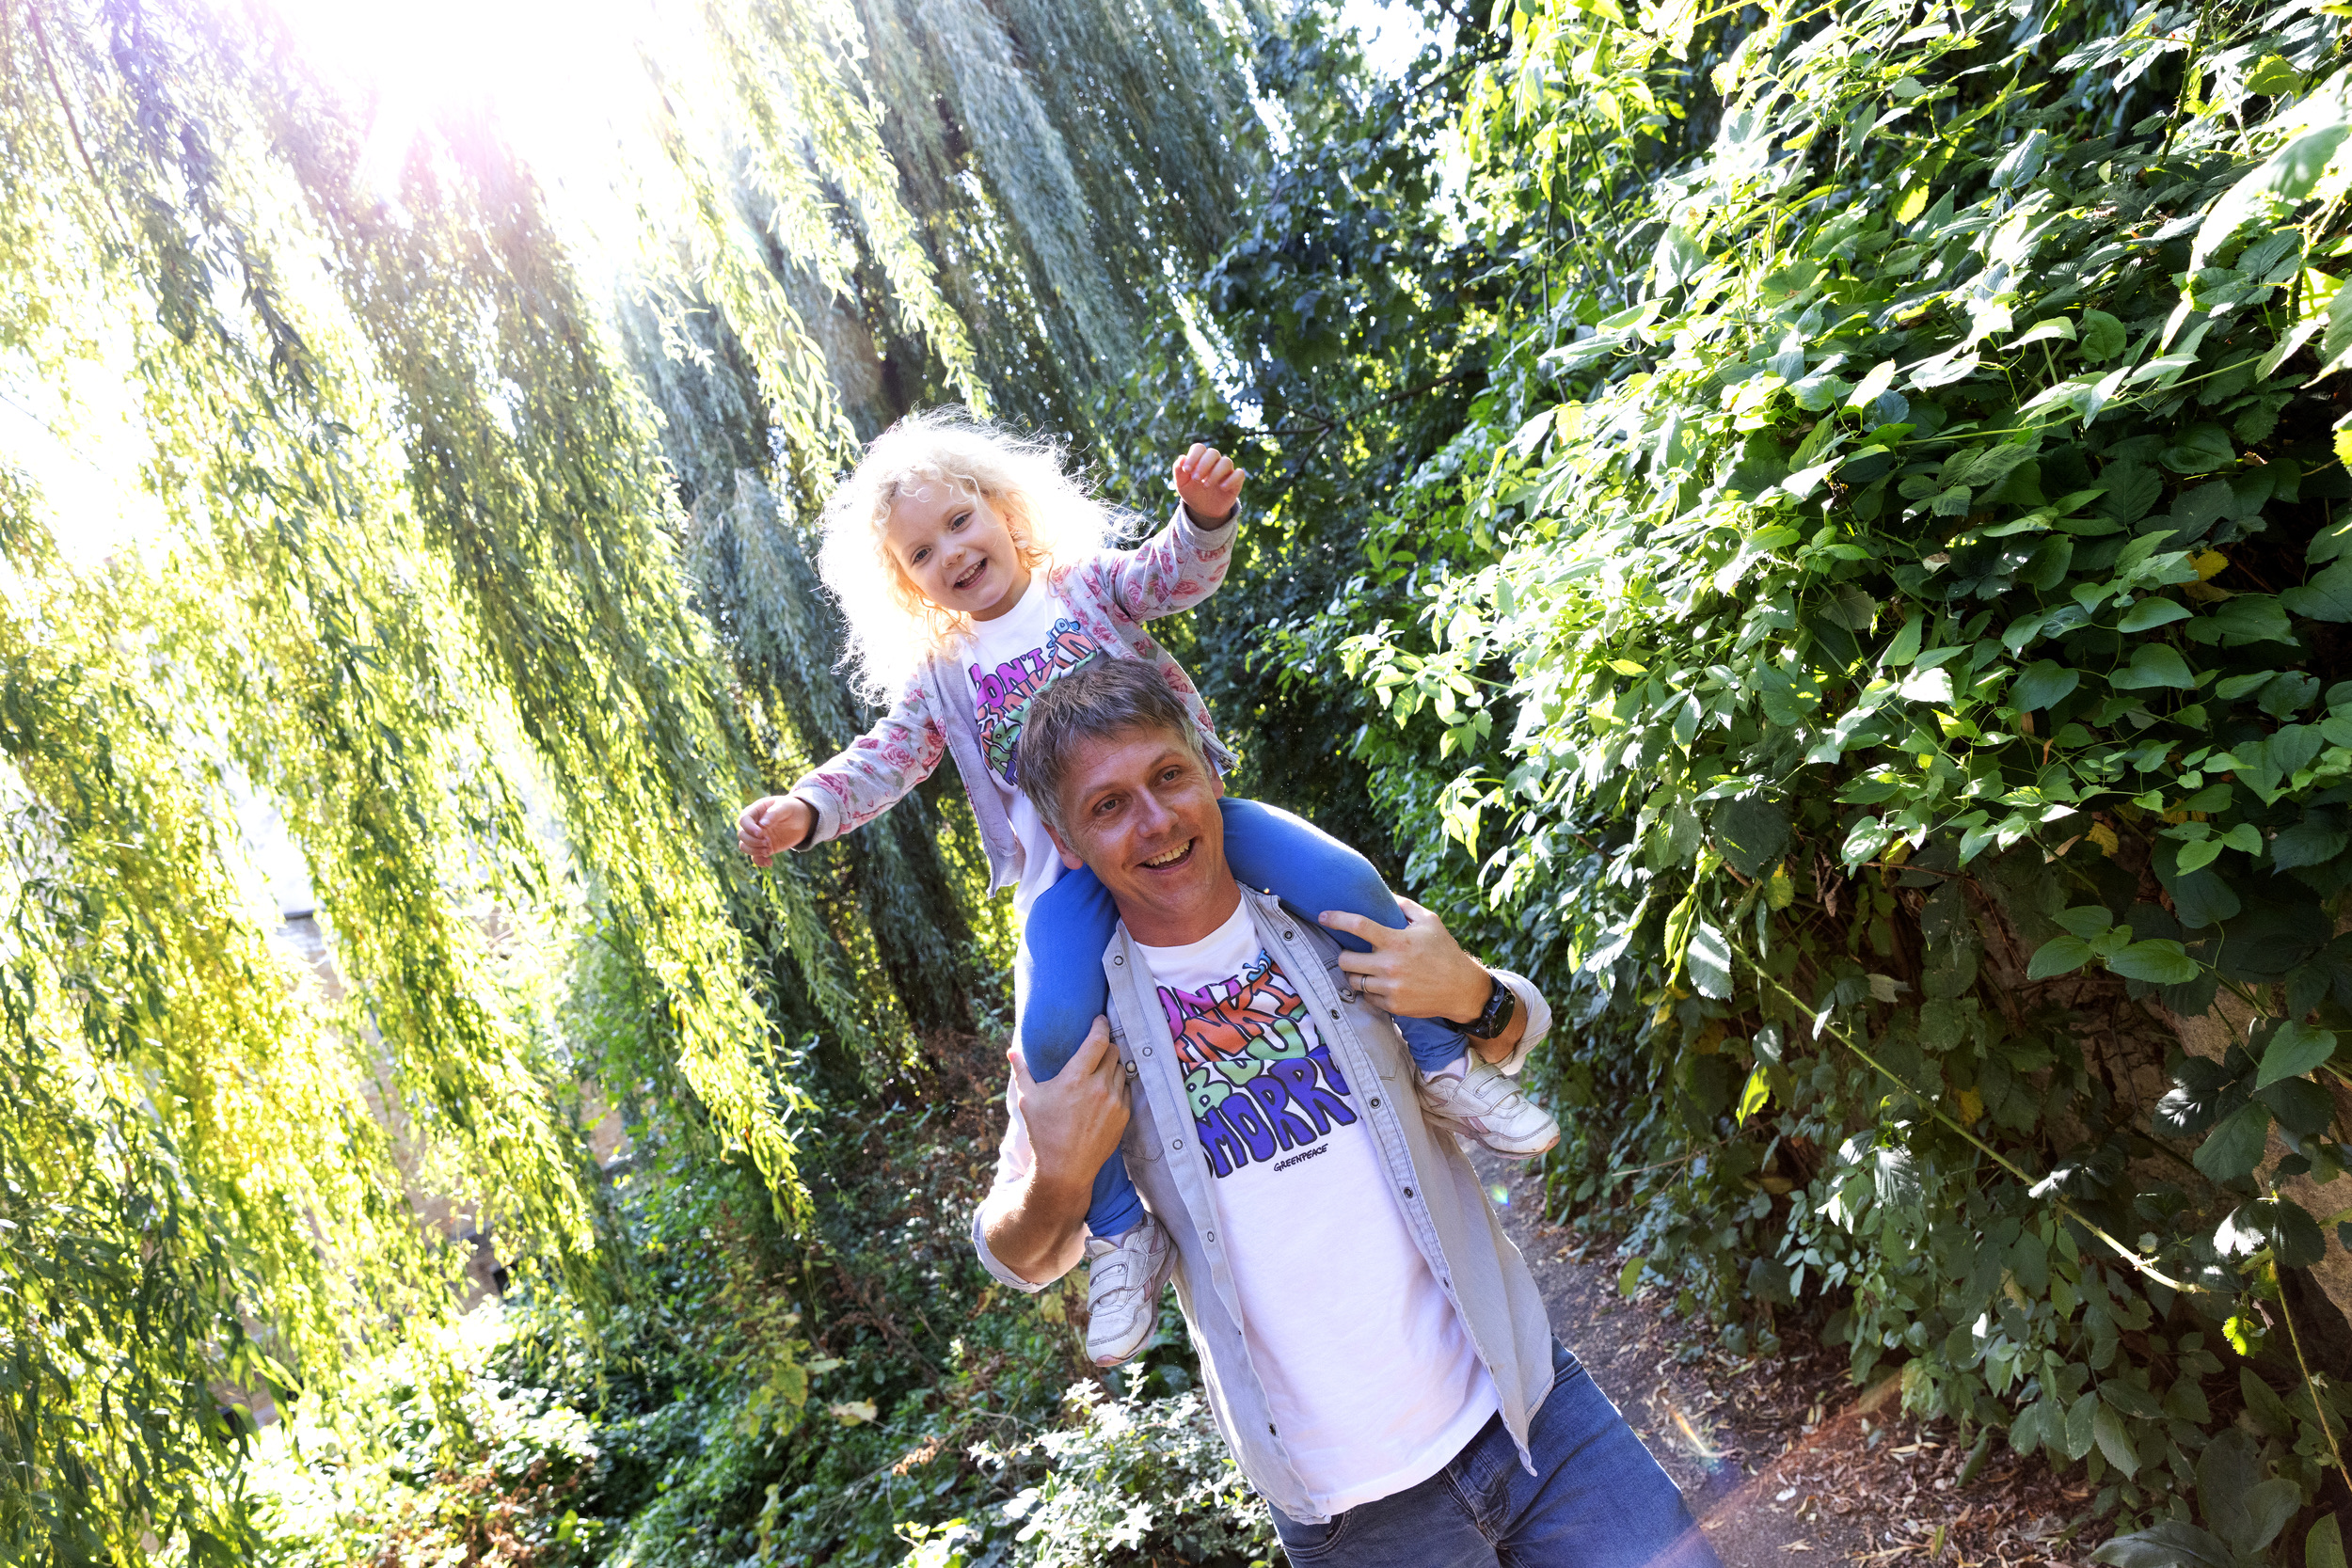 An adult carries a child on his shoulders. Sunlight shines through the trees in the background and illuminates the child's blonde hair.